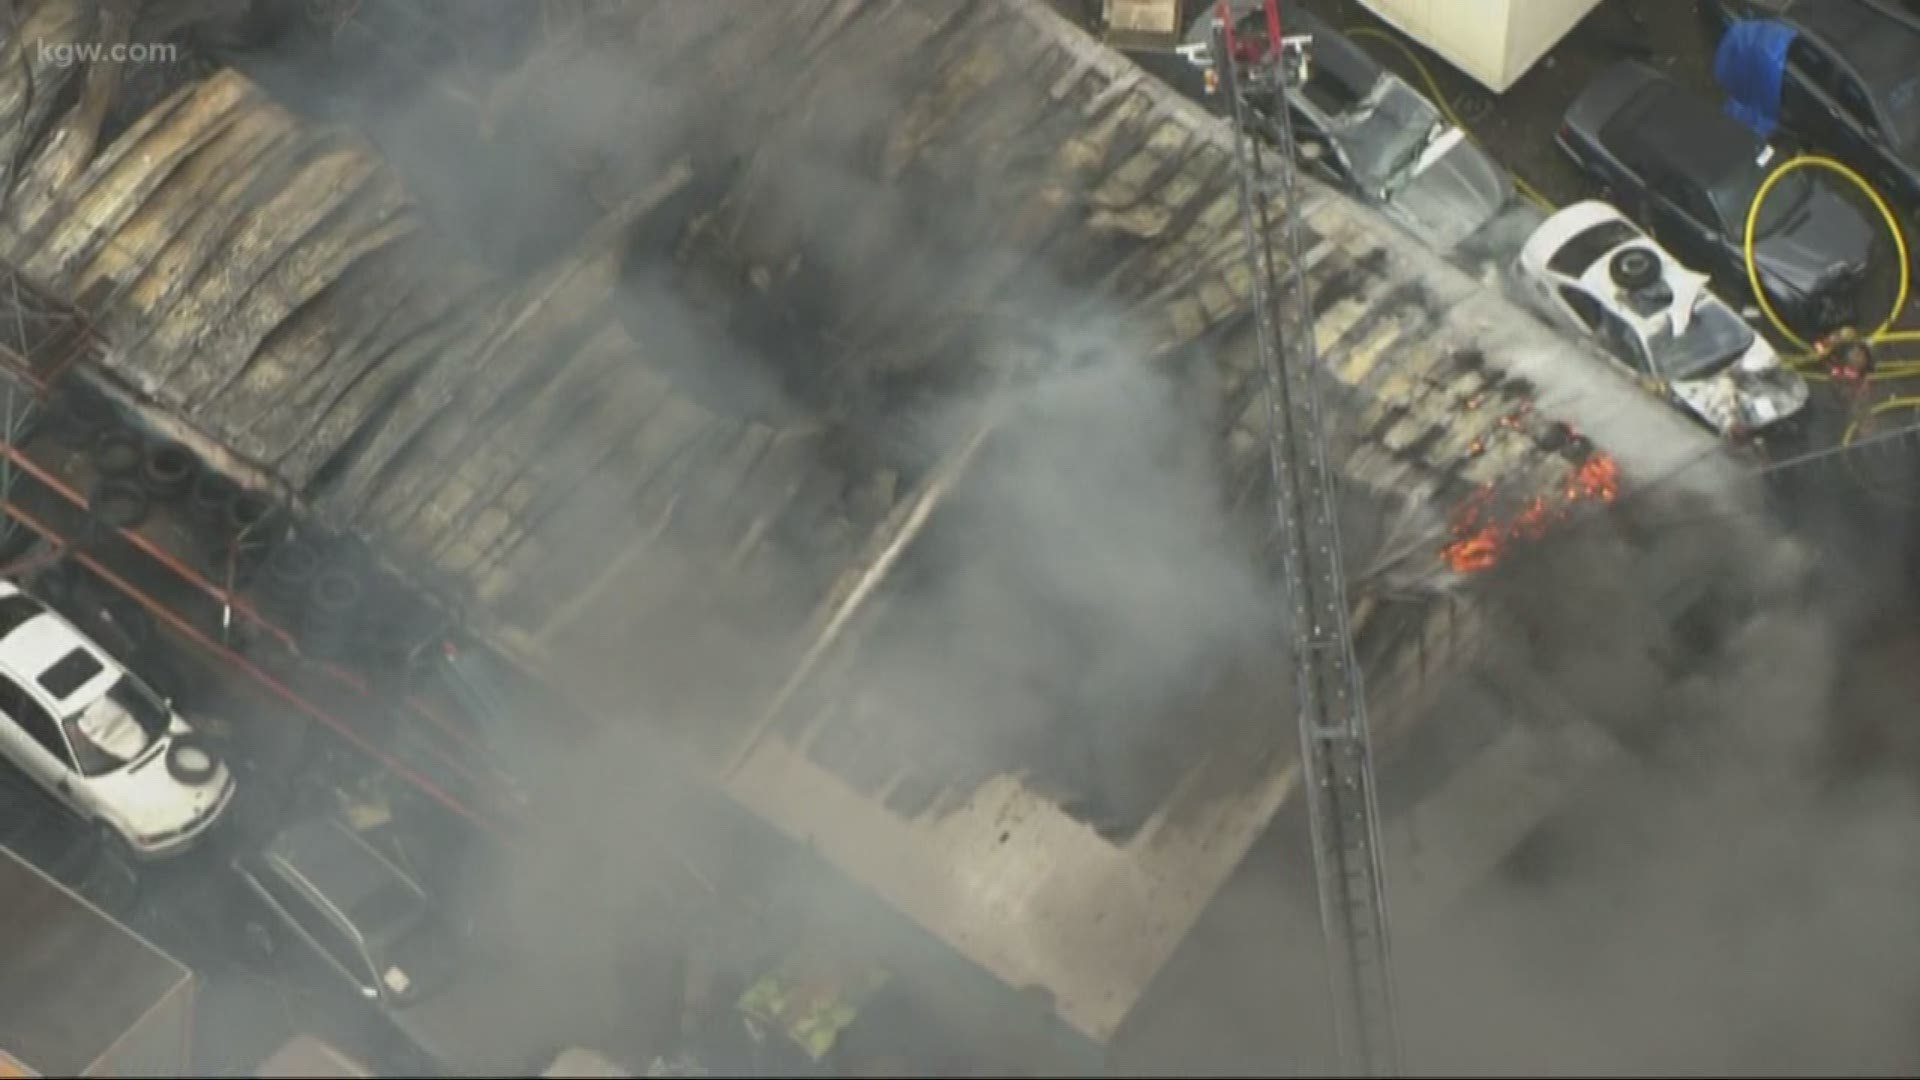 A 2-alarm fire gutted an auto wrecking shop near Southeast 190th Avenue and Division Street.